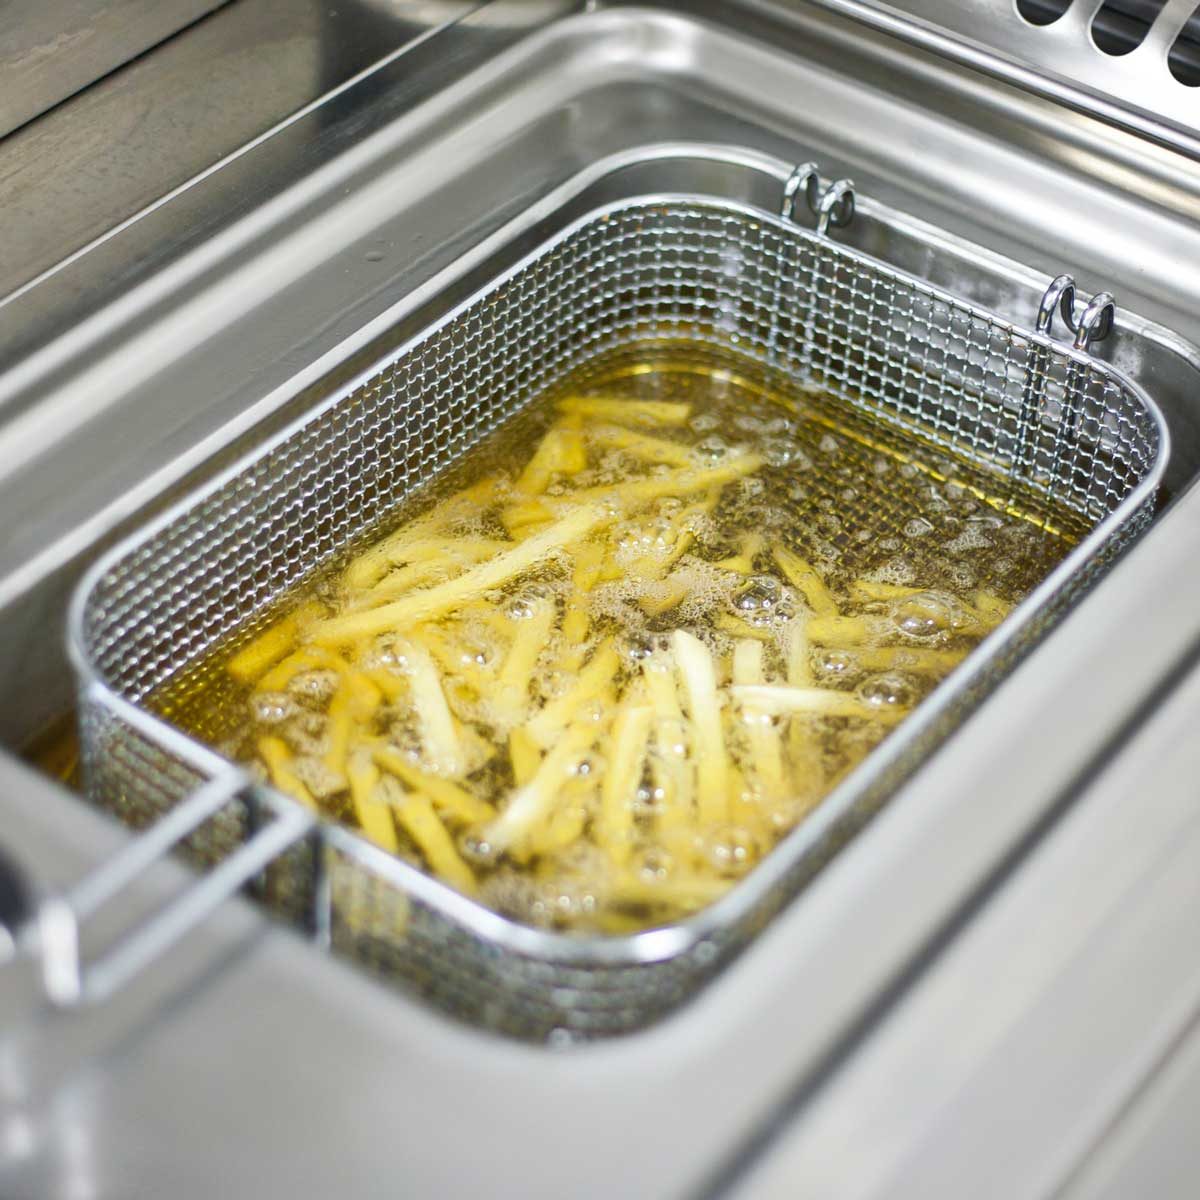 https://www.familyhandyman.com/wp-content/uploads/2020/06/frying-french-fries-GettyImages-149419715.jpg